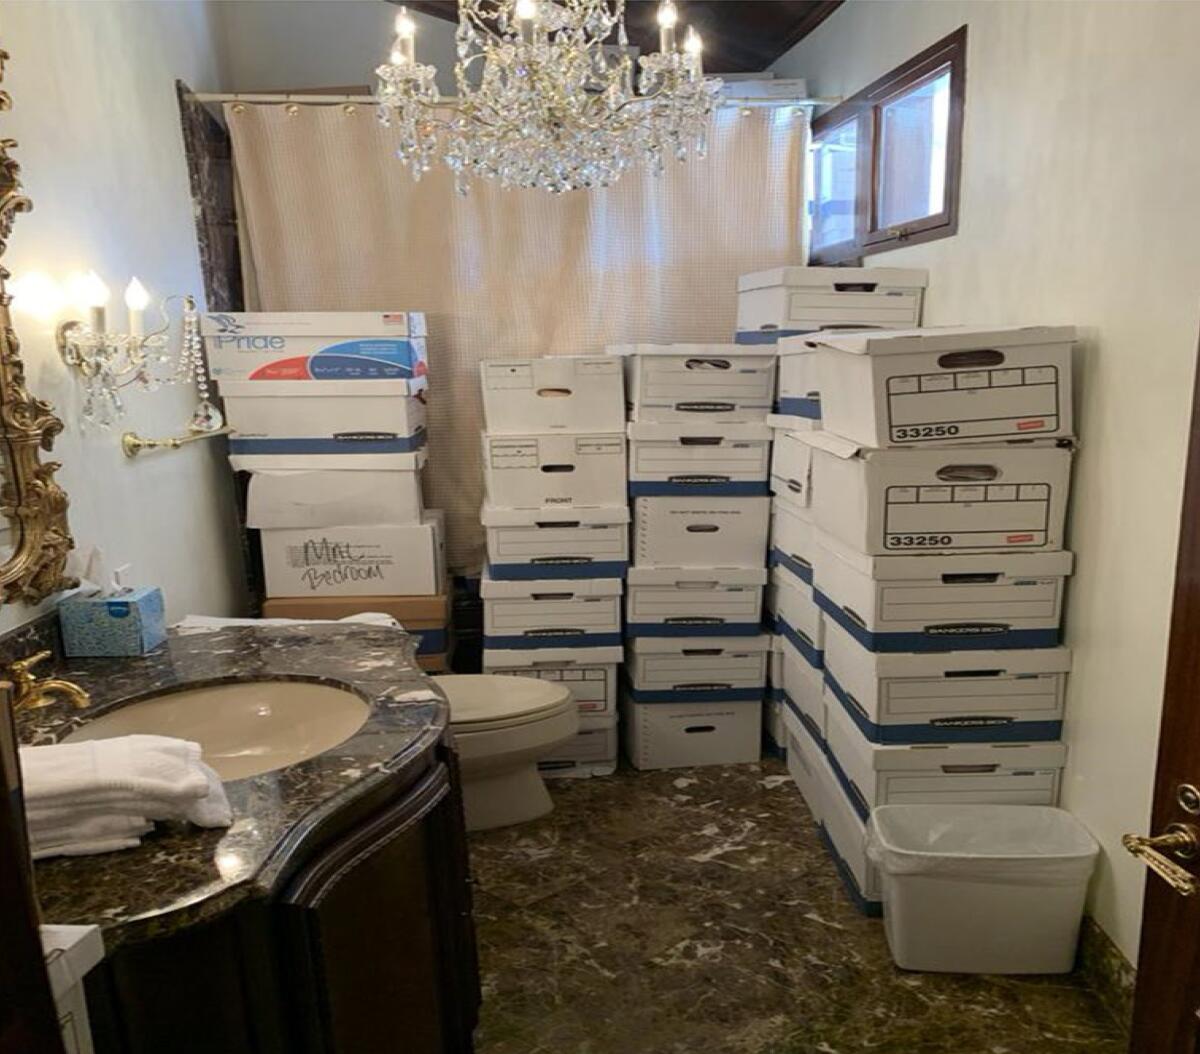 Dozens of white boxes stacked near the toilet and shower of a bathroom lighted with chandeliers